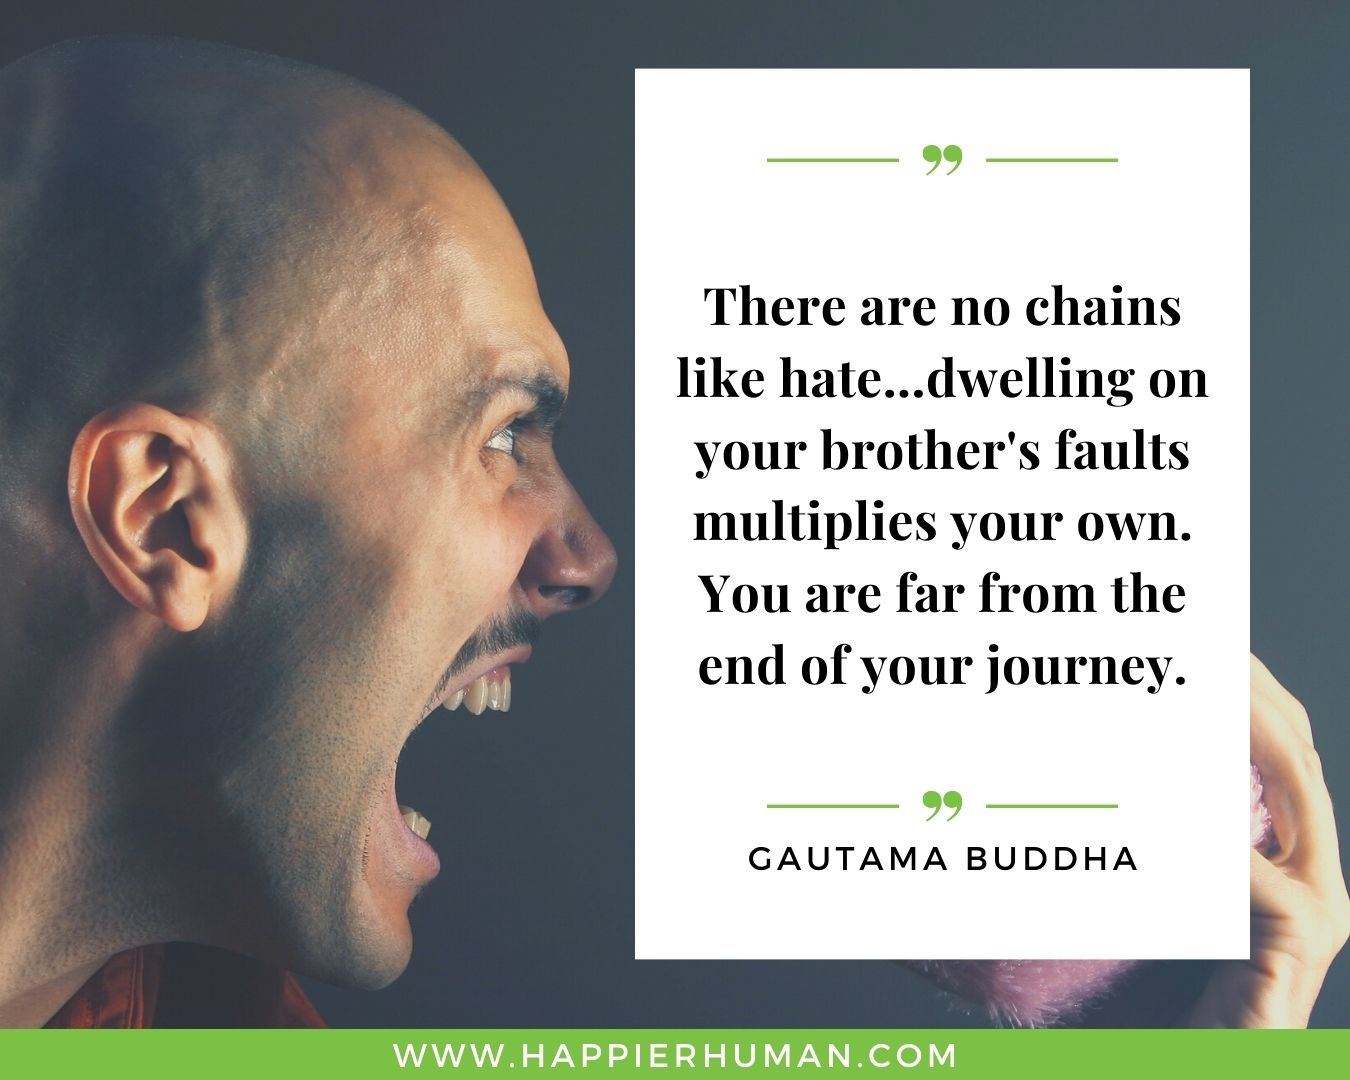 Haters Quotes - “There are no chains like hate...dwelling on your brother's faults multiplies your own. You are far from the end of your journey.” - Gautama Buddha